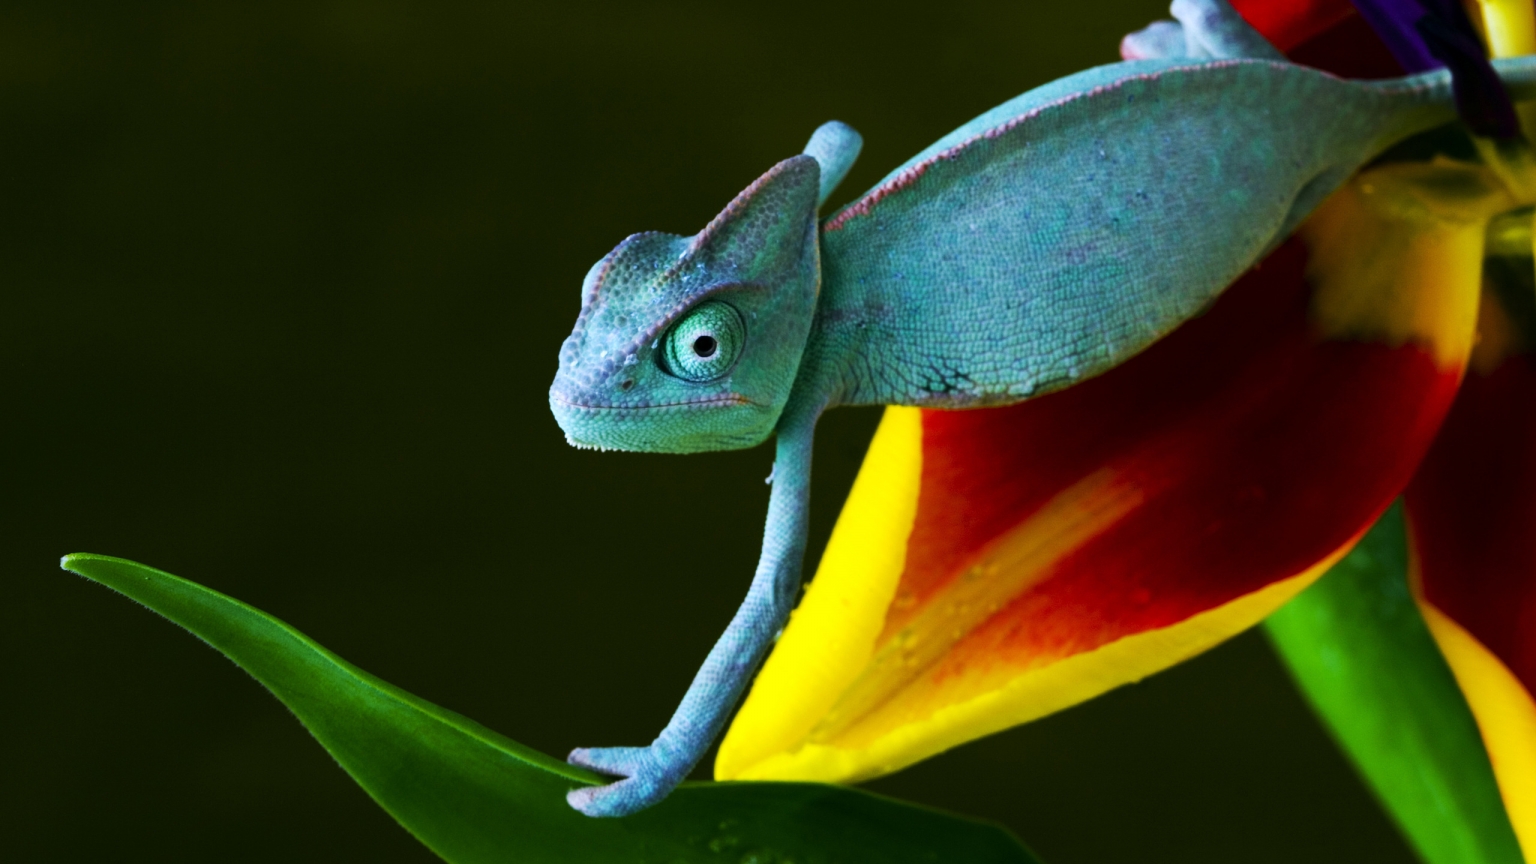 Baby Reptile for 1536 x 864 HDTV resolution